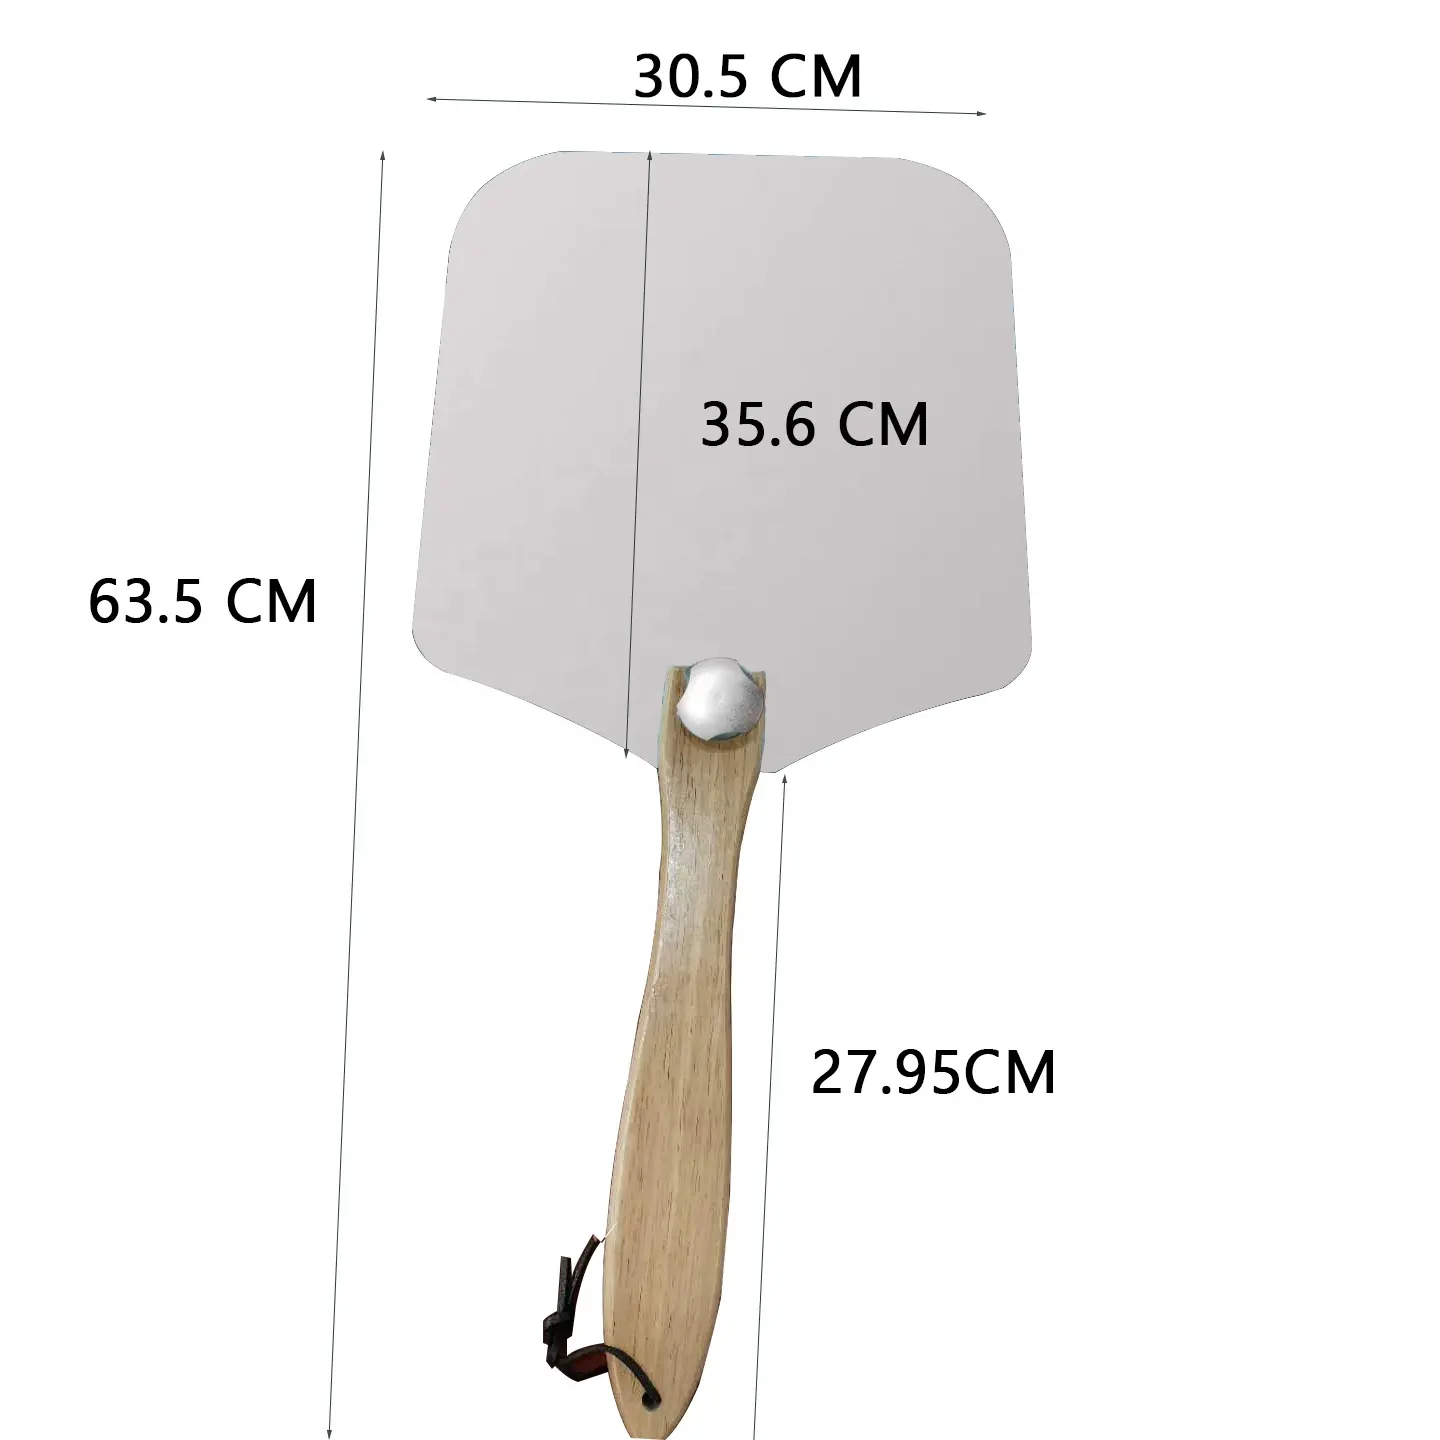 Aluminum Pizza Shovel 12*14 Inch Oven Square Pizza Peel Wooden Handle Aluminum Pizza Shovel With 14 Inch Stainless Steel Pizza Cutter Set